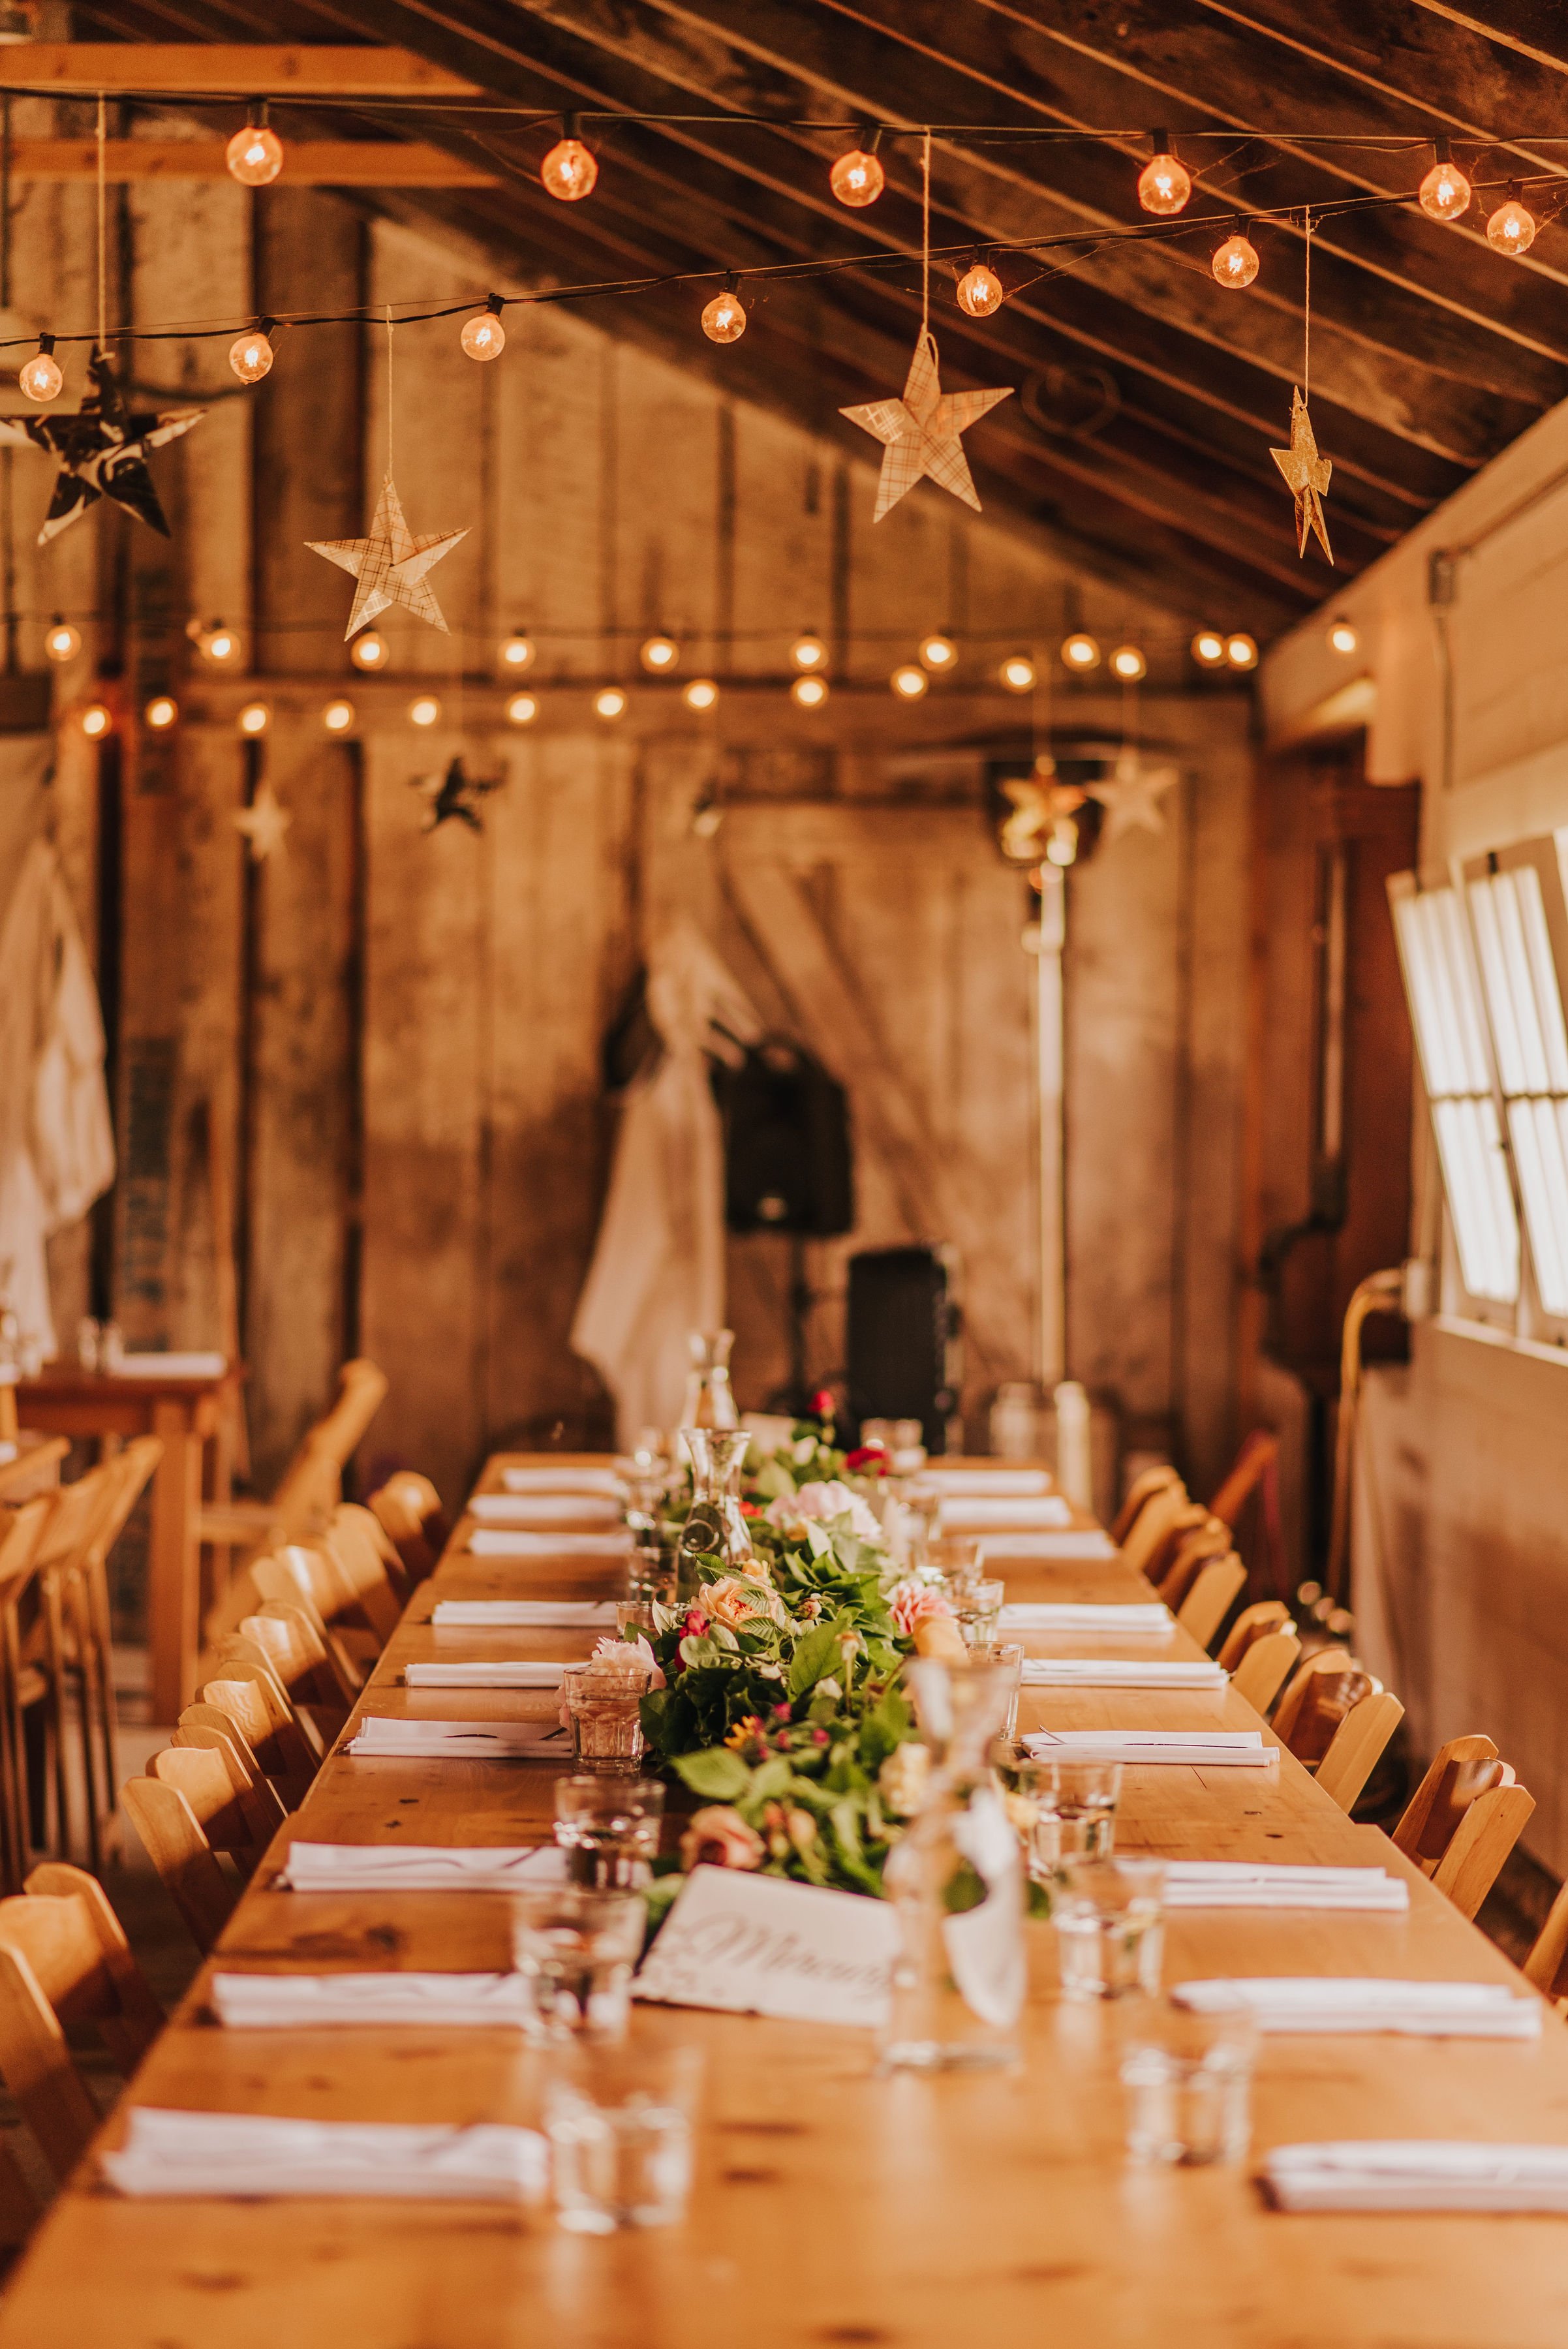  A long table is set for a wedding reception. 